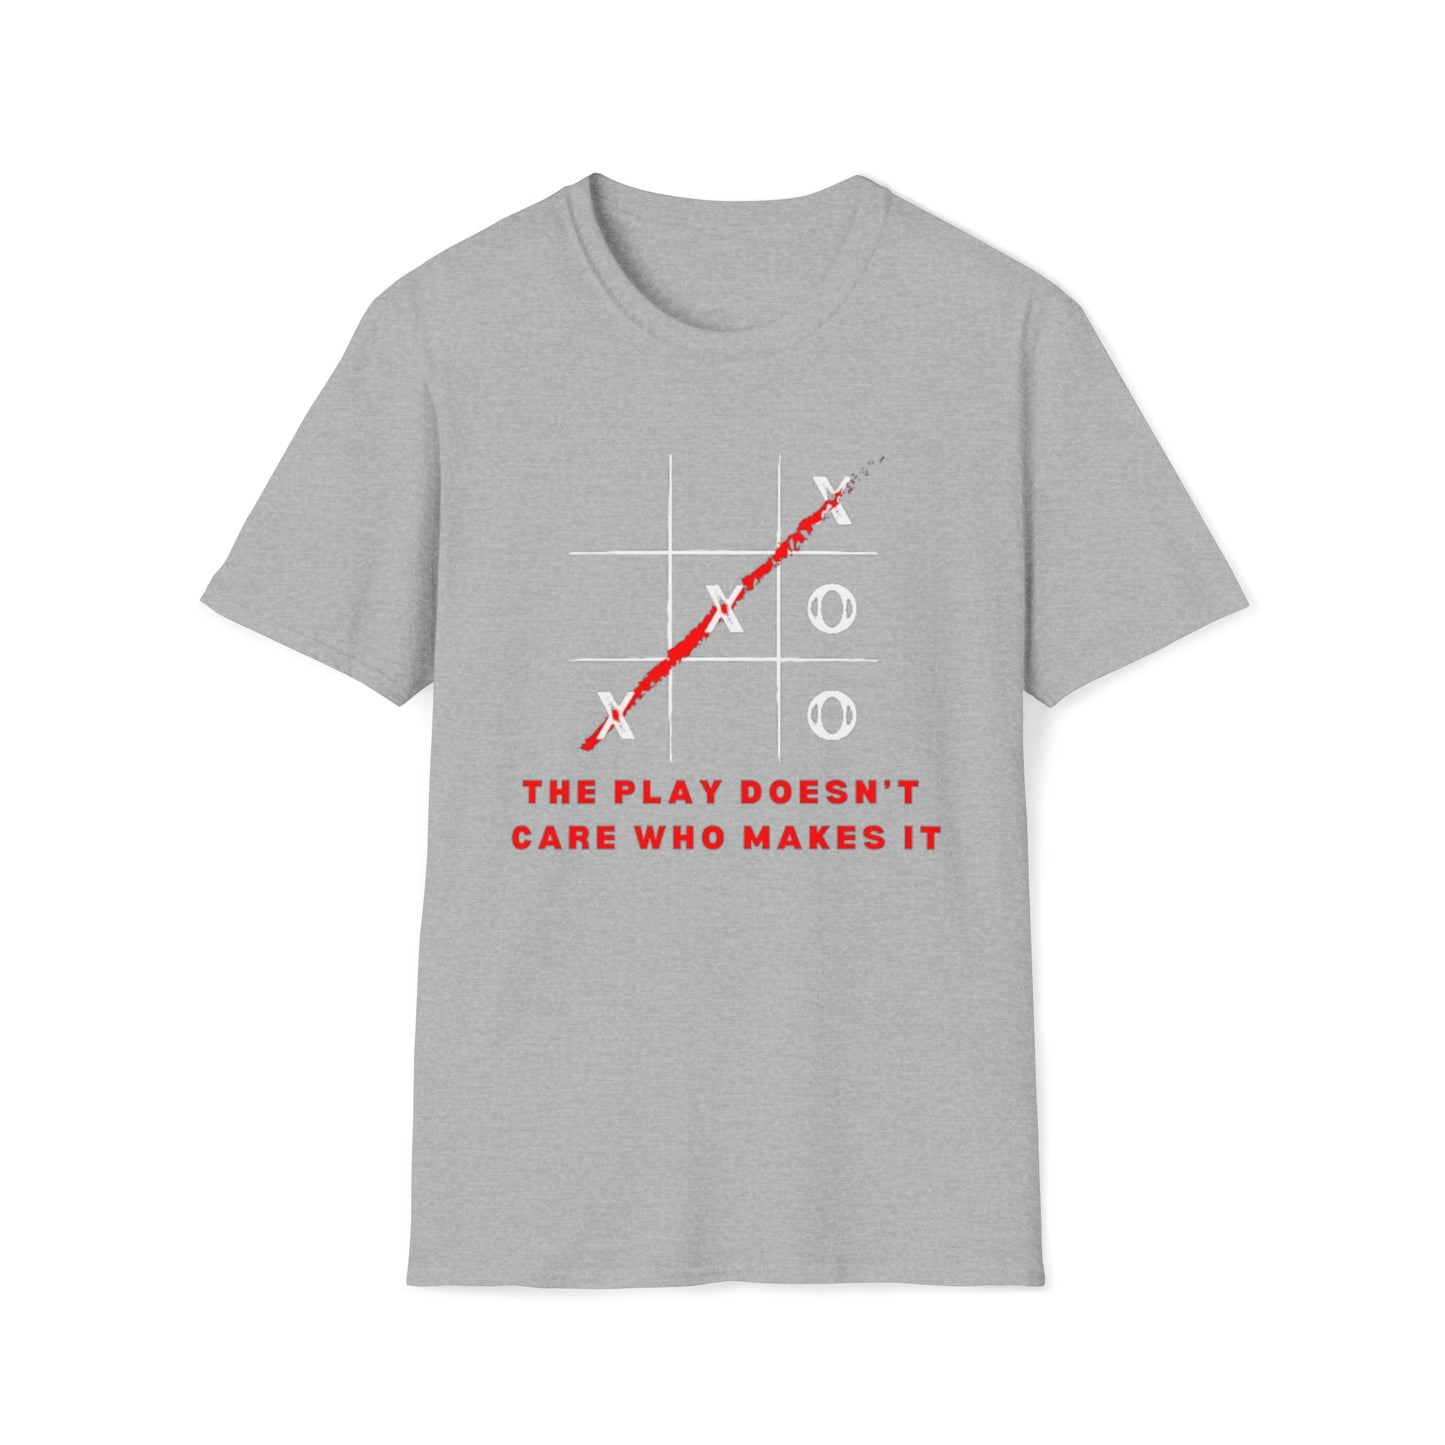 The Play Doesn't Care Who Makes It Unisex Softstyle T-Shirt